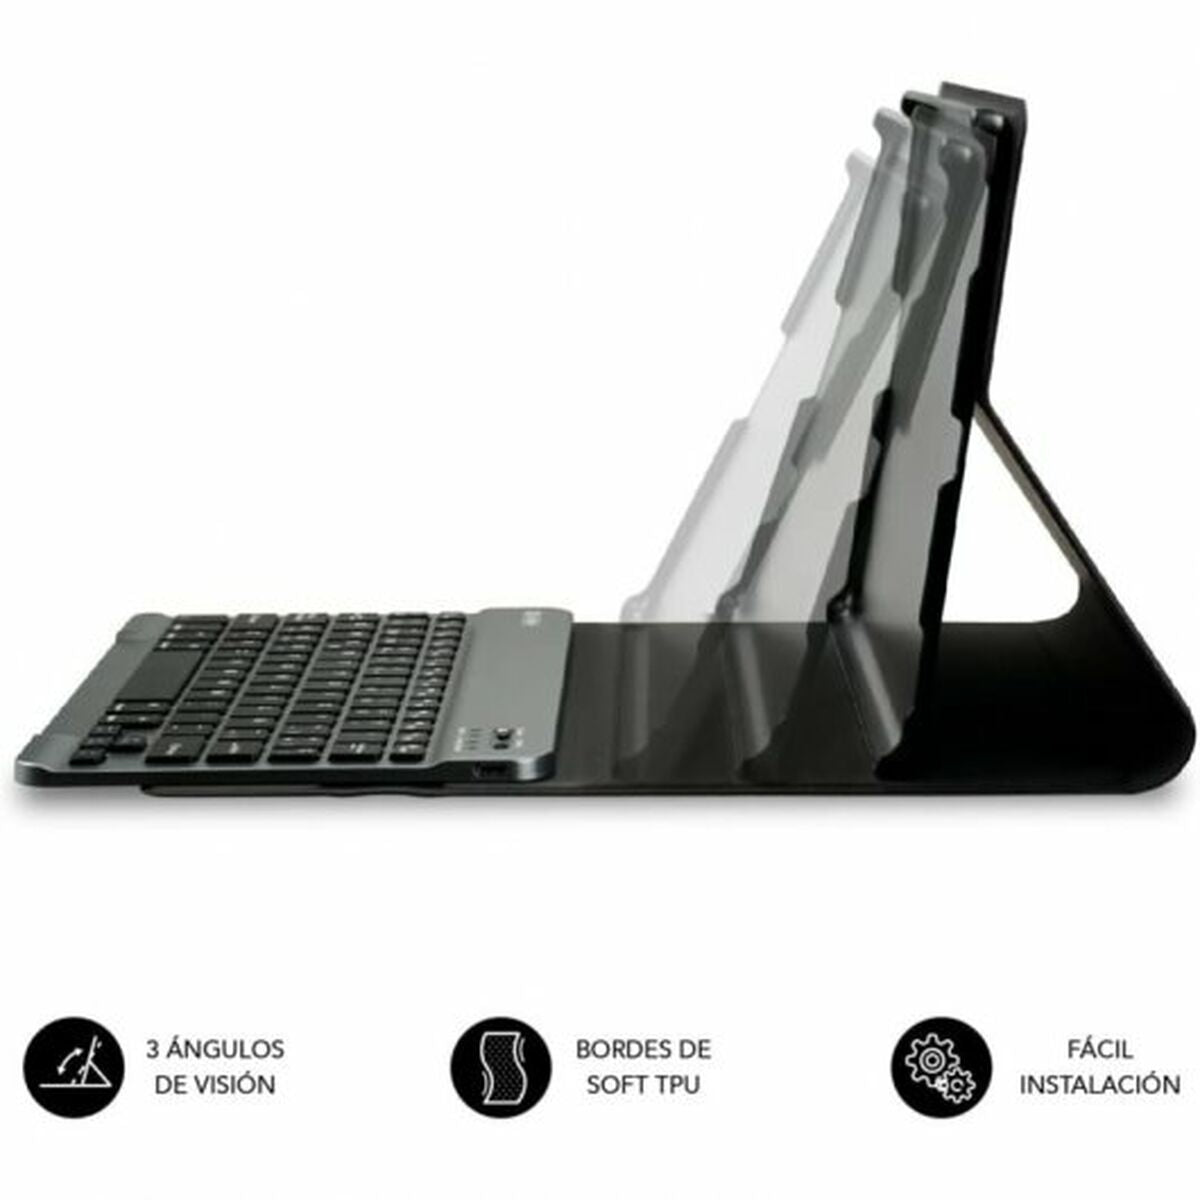 Case for Tablet and Keyboard Subblim Lenovo Tab M10 Plus Black 10,6" Spanish Qwerty QWERTY